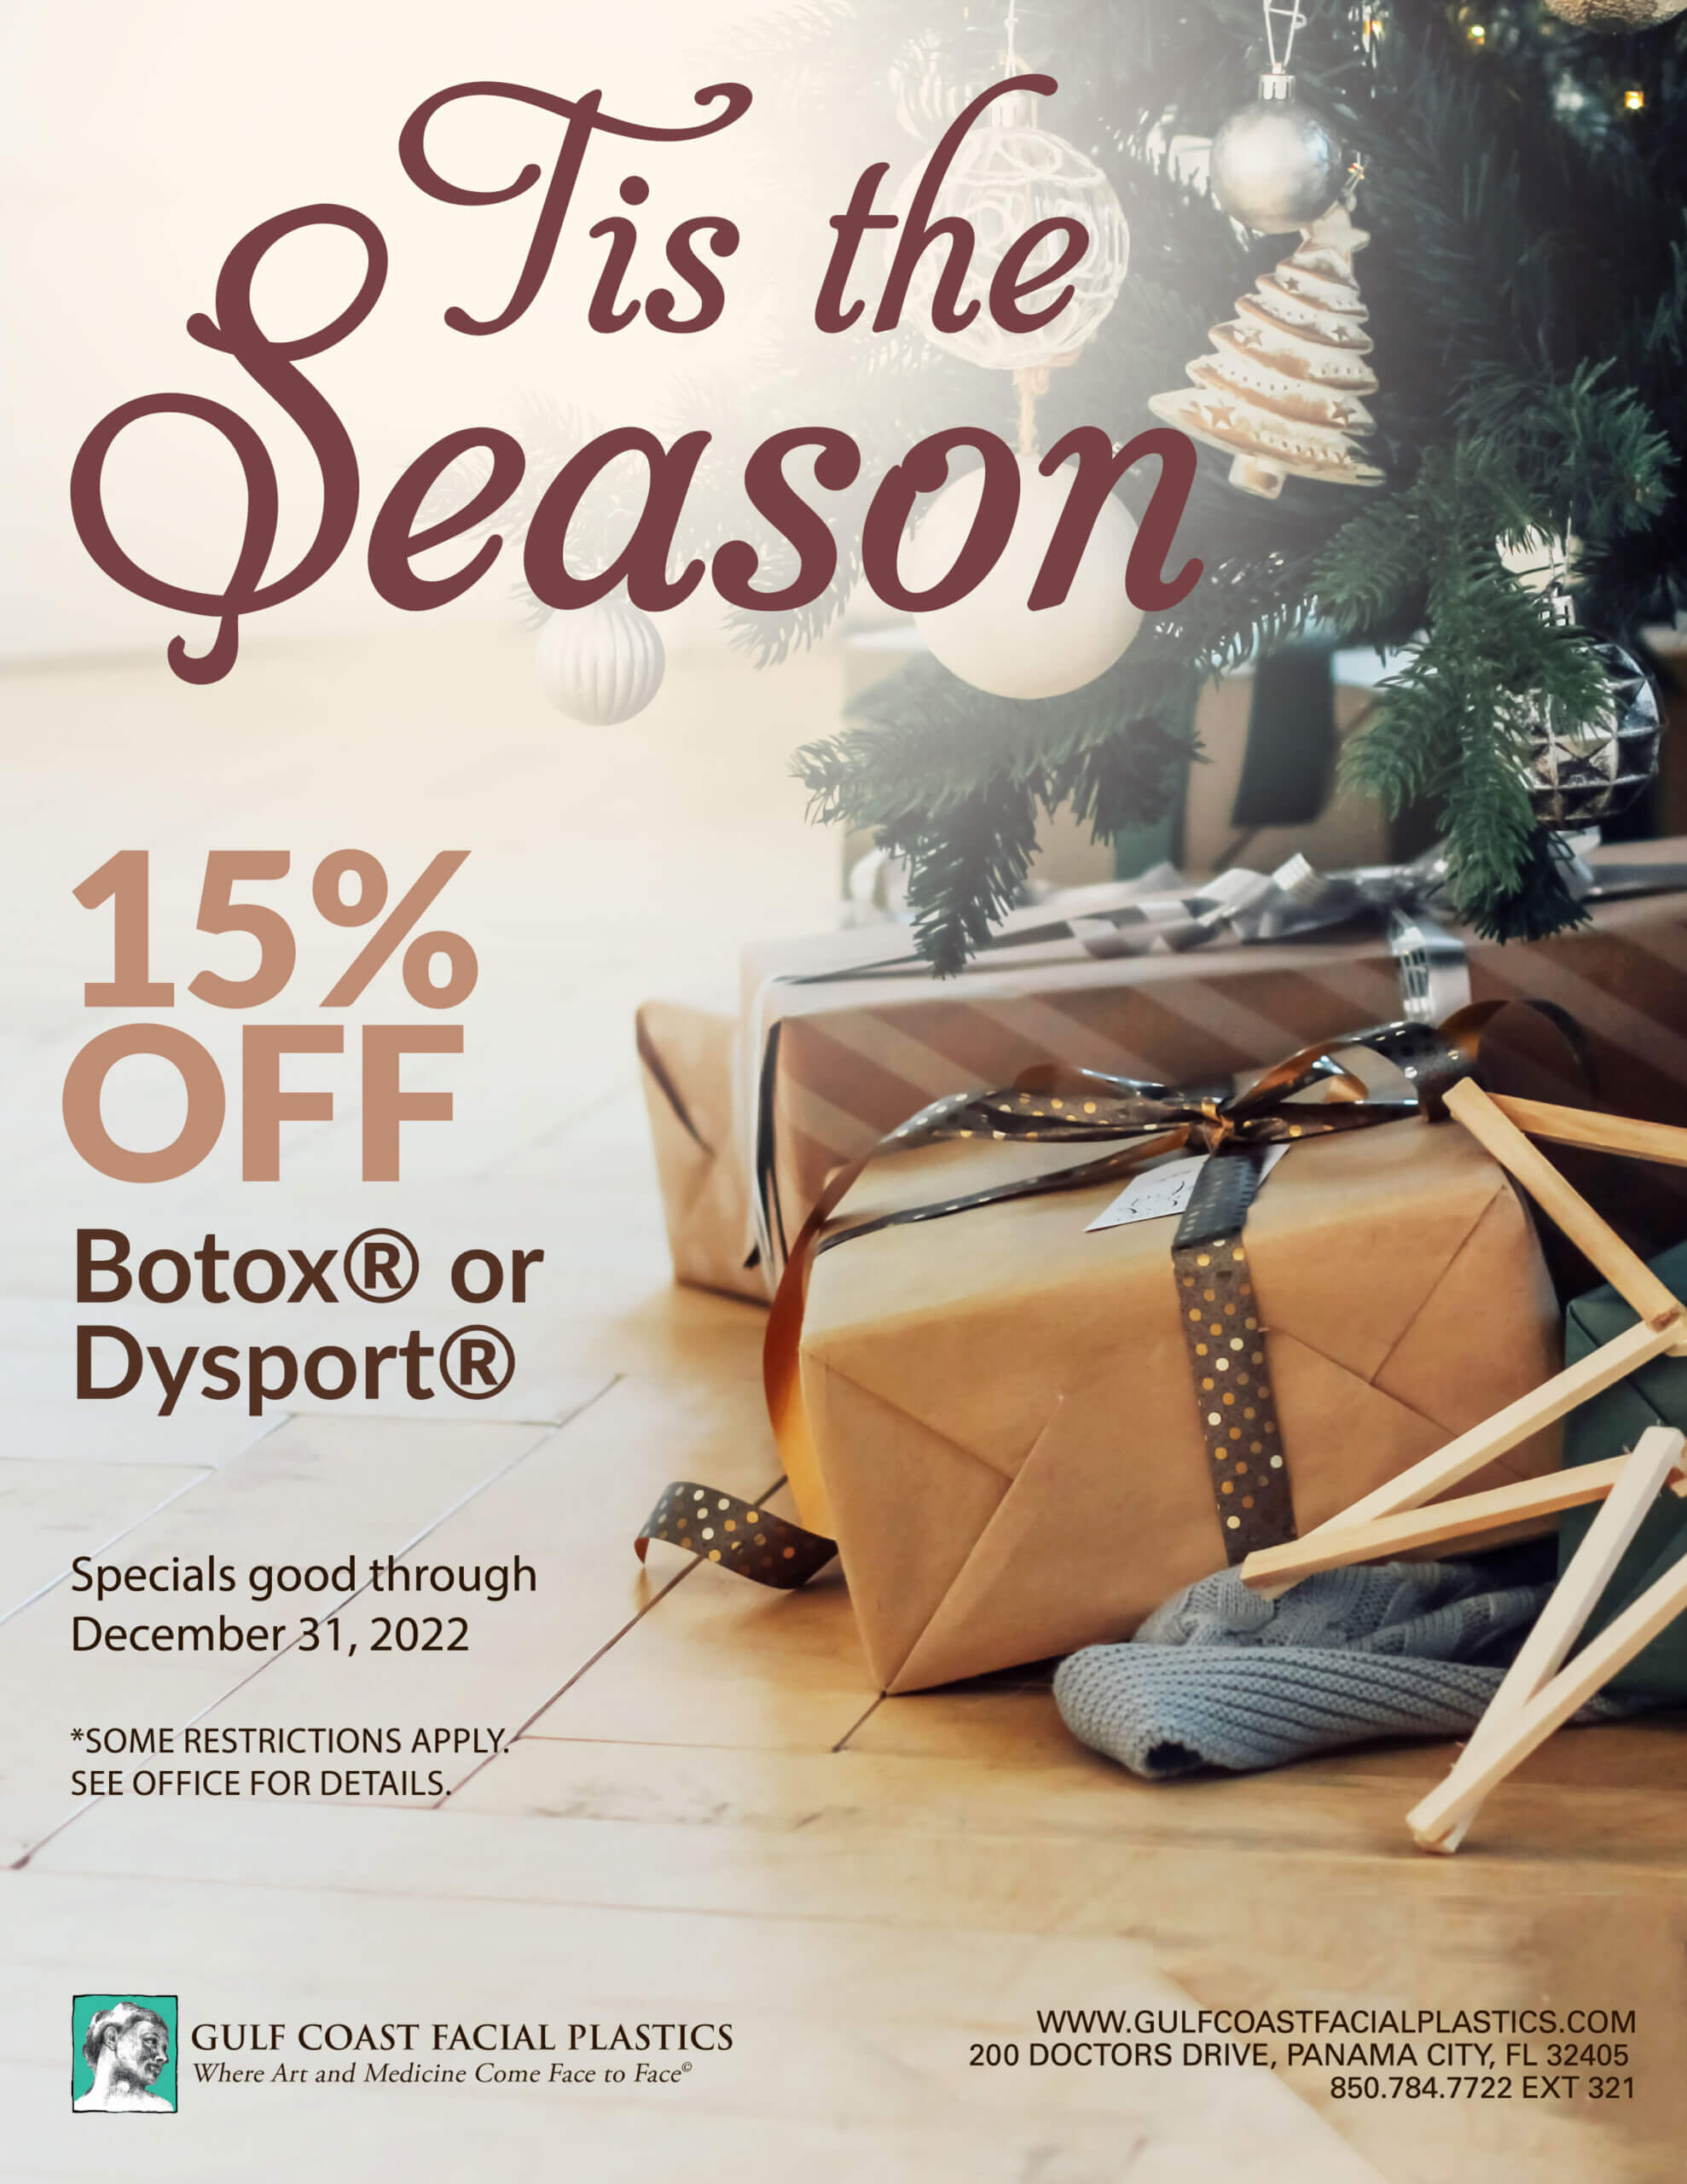 'Tis the season for 15% OFF Botox or Dysport though the month of December